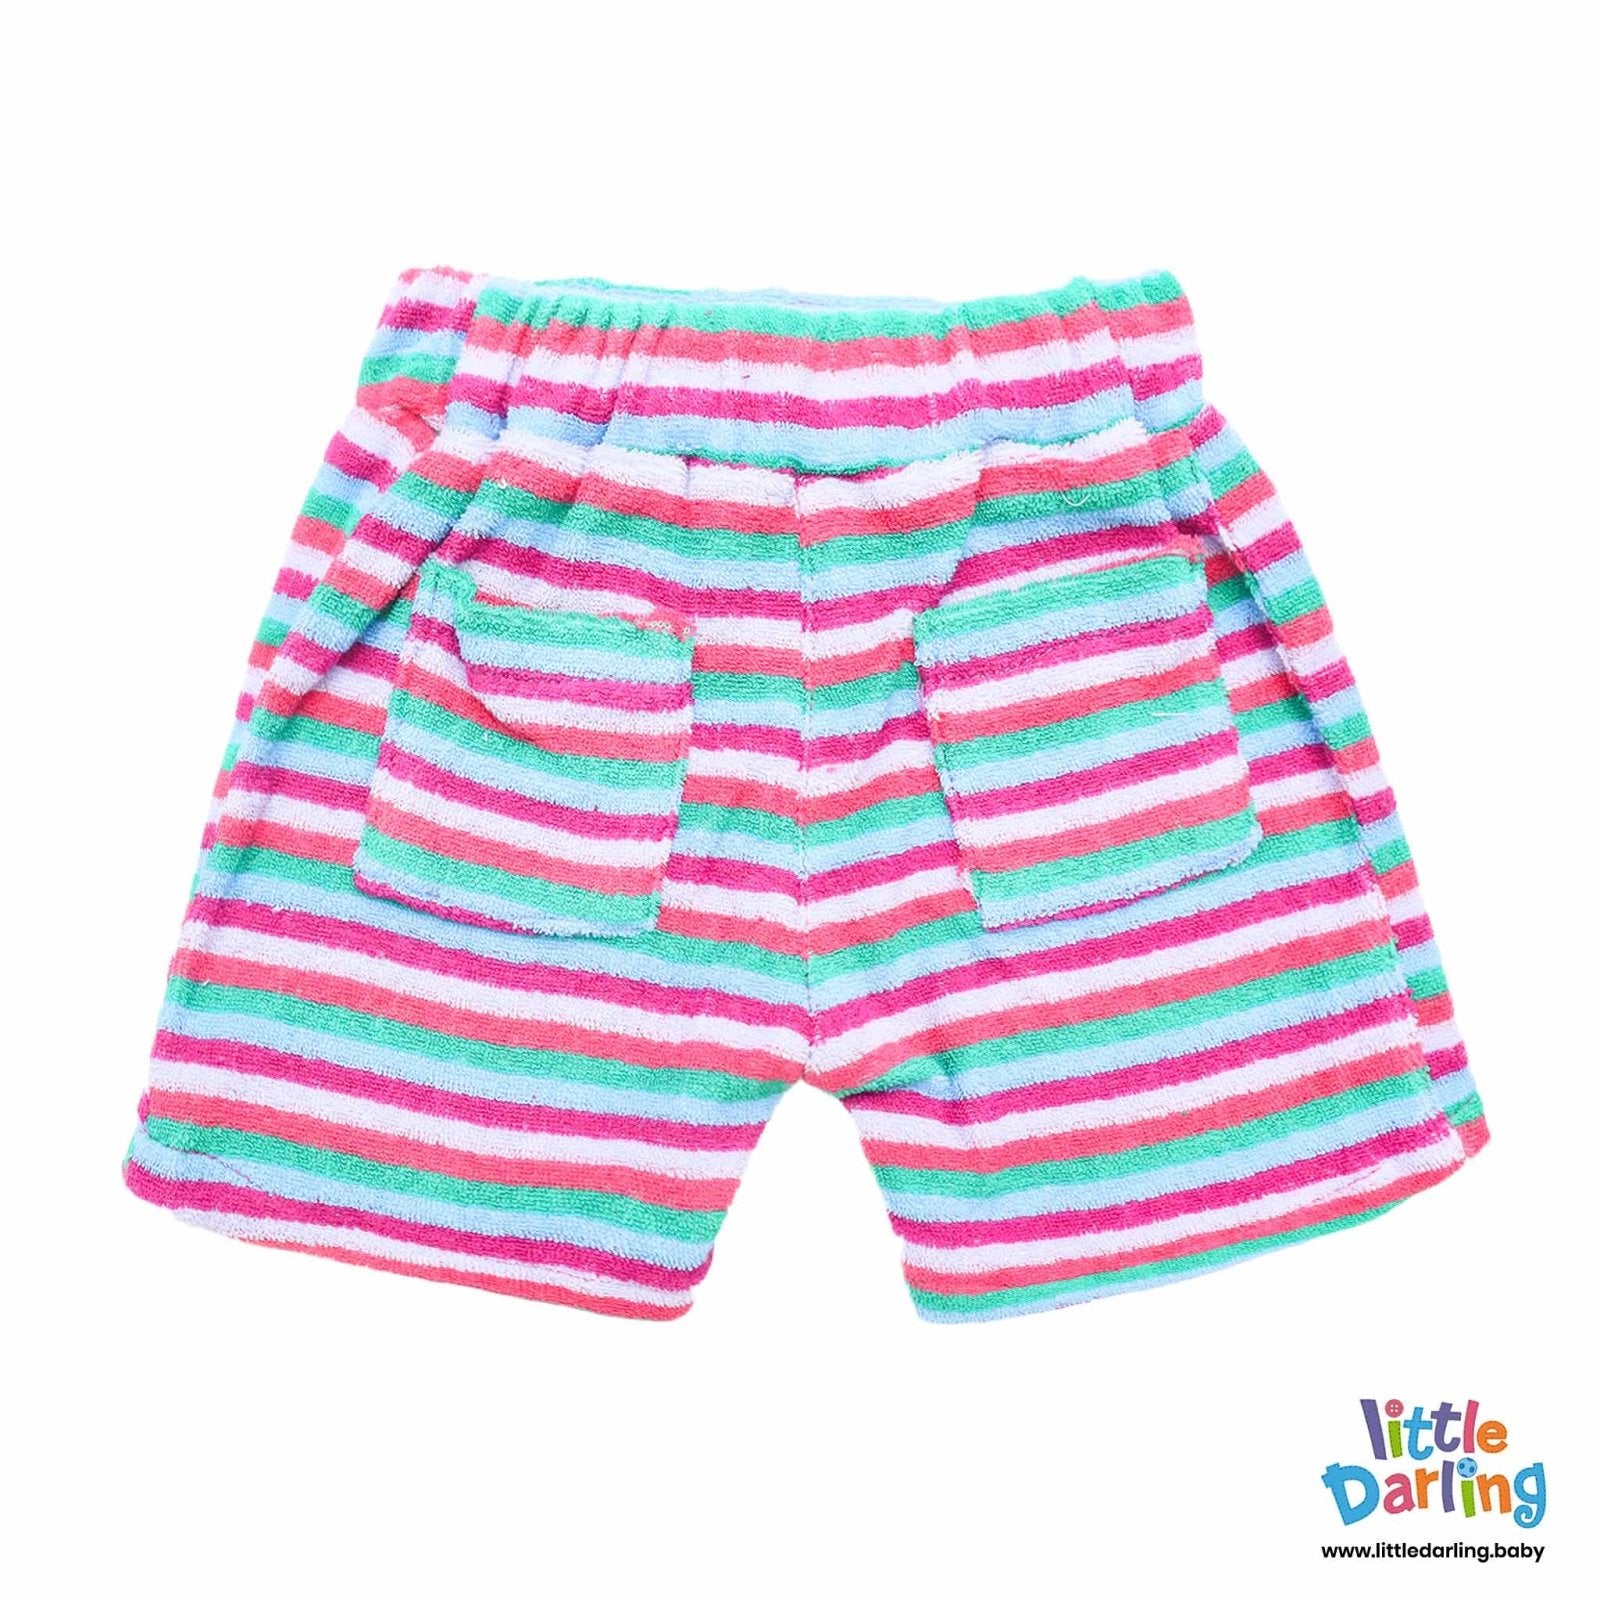 Fancy Swimming Shorts Multi Color by Little Darling